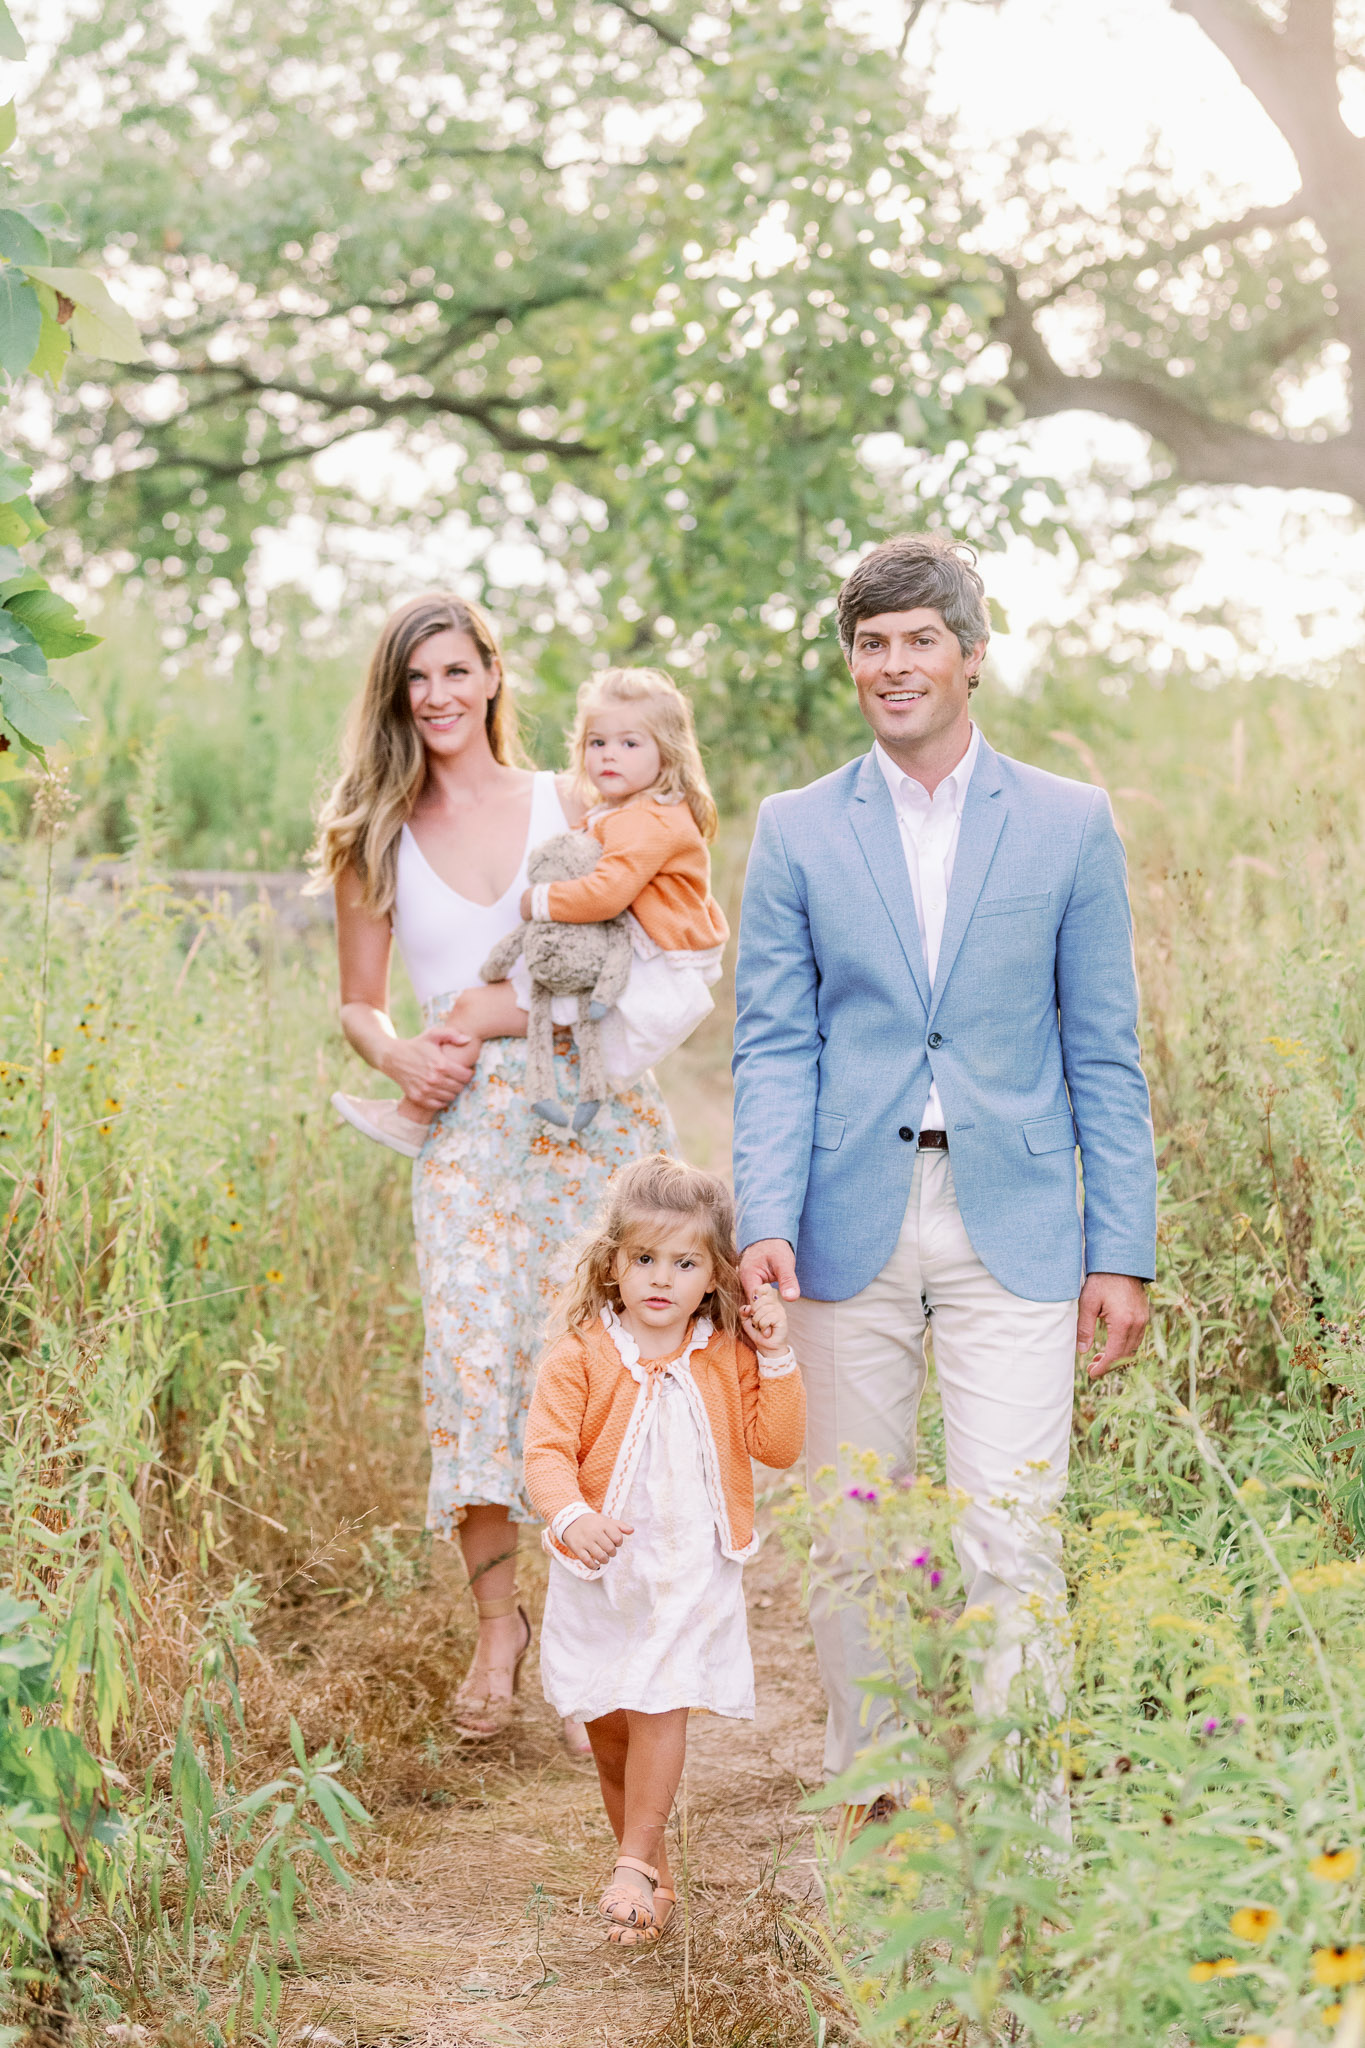 Light and Airy Chicago Naples Lifestyle Family Photographer – Mayslake Forest Preserve Family Photos-53